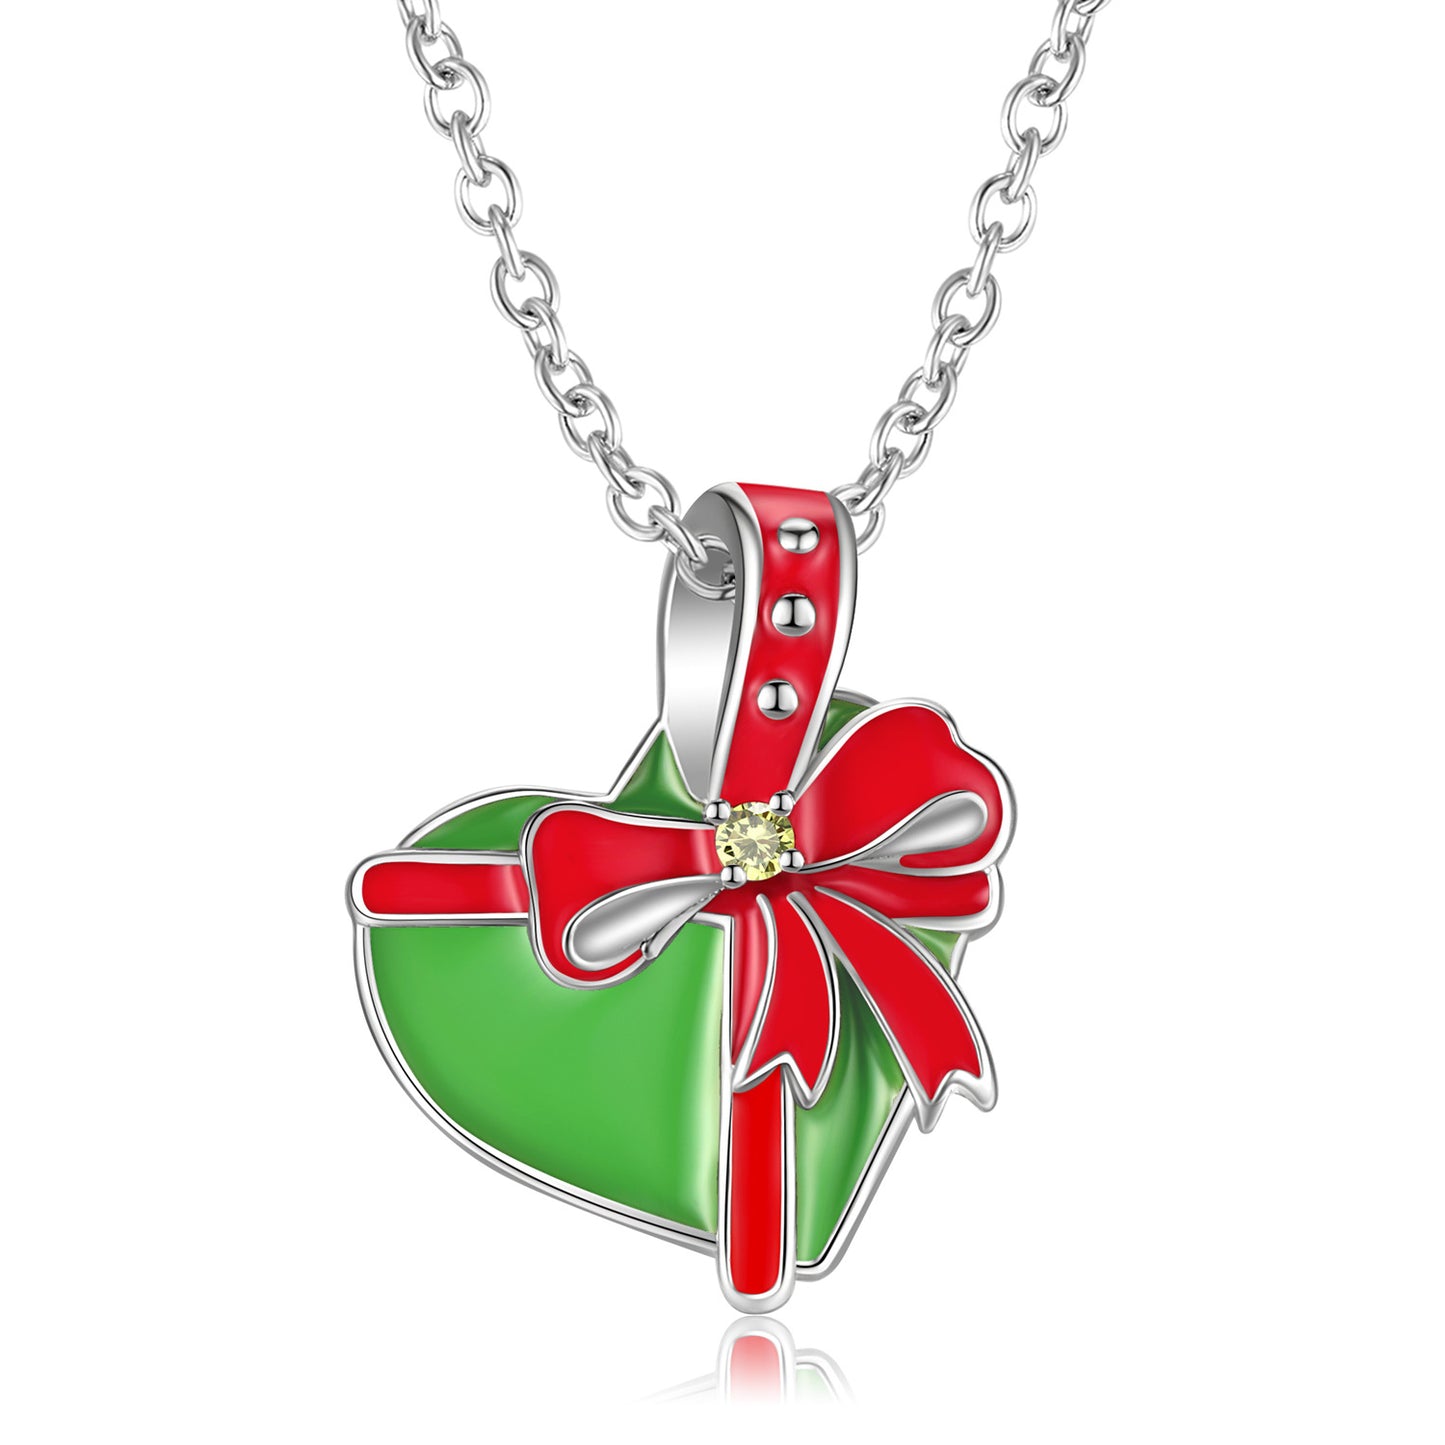 FairyLocus "Everlasting Love" Christmas Heart Cut Sterling Silver Necklace Jewelry Gift FLCYNL02 FairyLocus